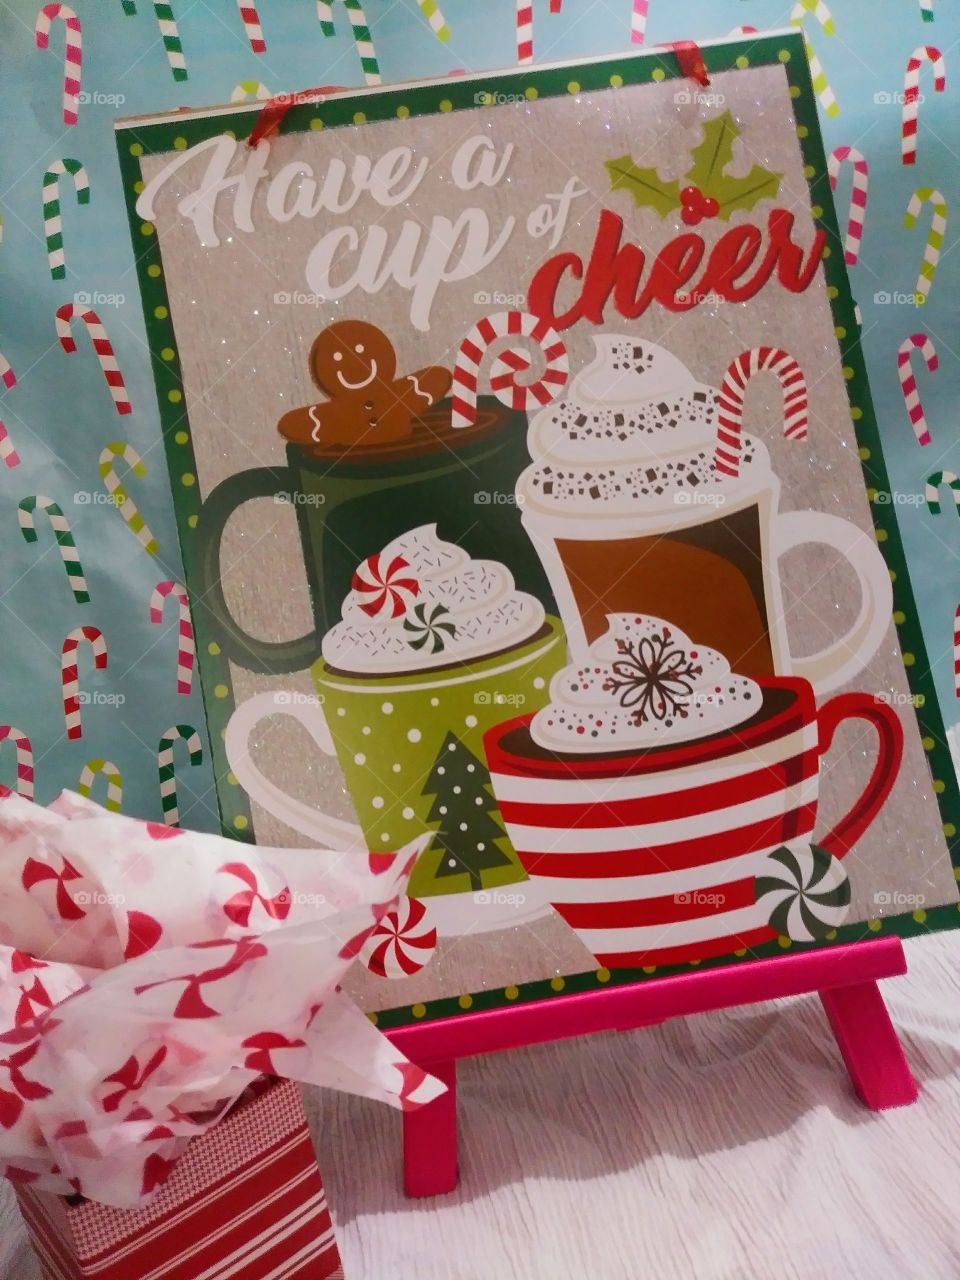 Have a cup of cheer! Christmas festive